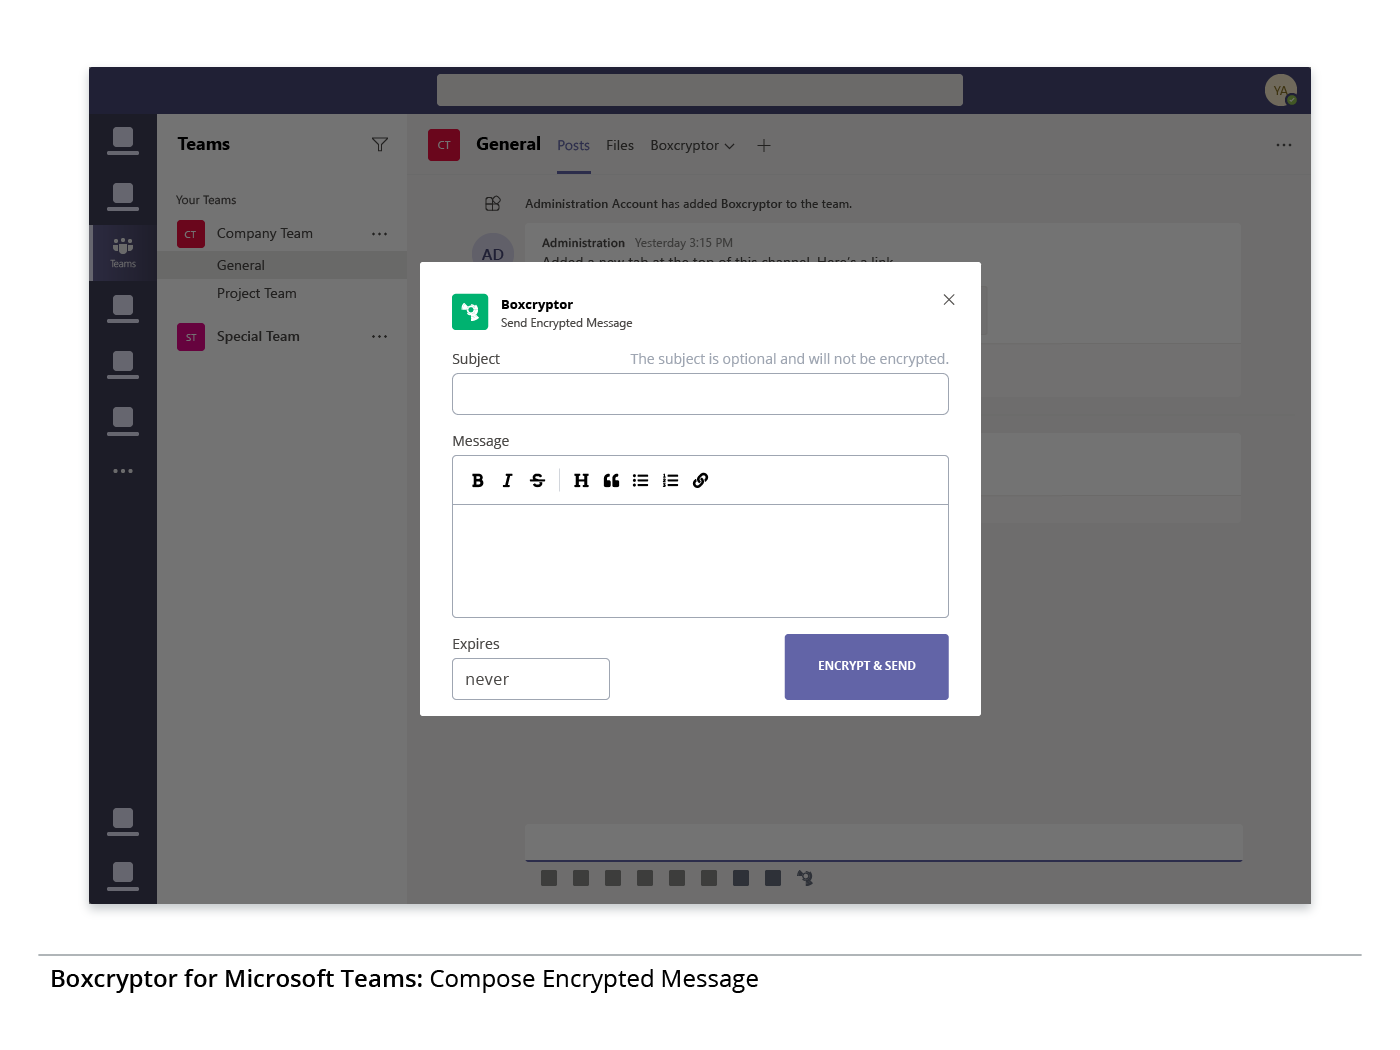 Compose Encrypted Message in Microsoft Teams